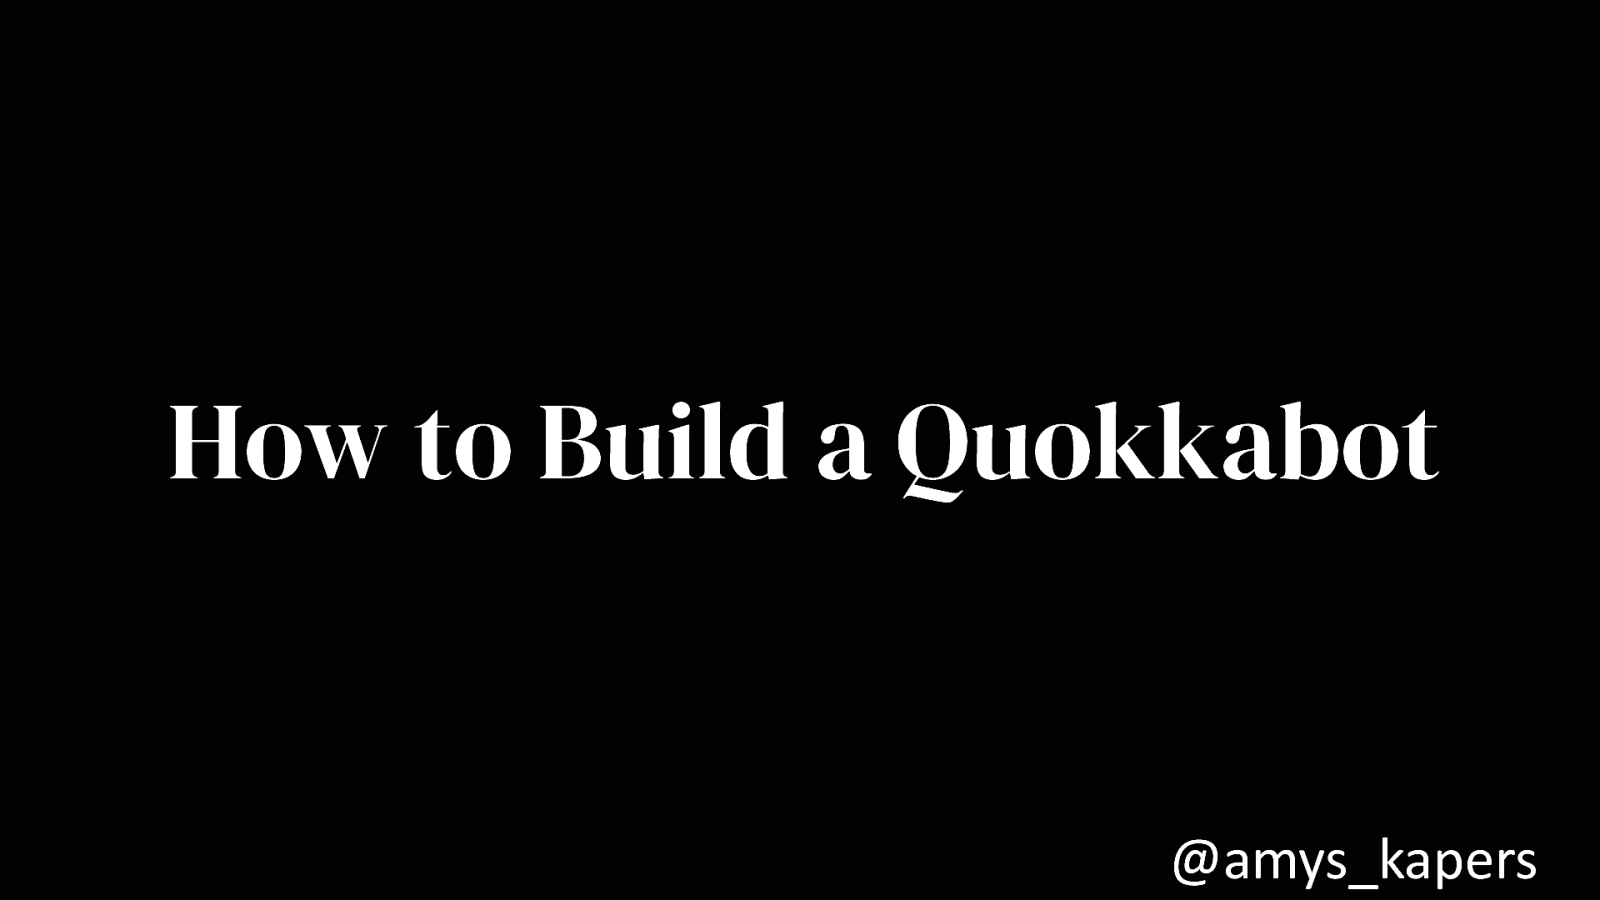 How to Build a Quokkabot